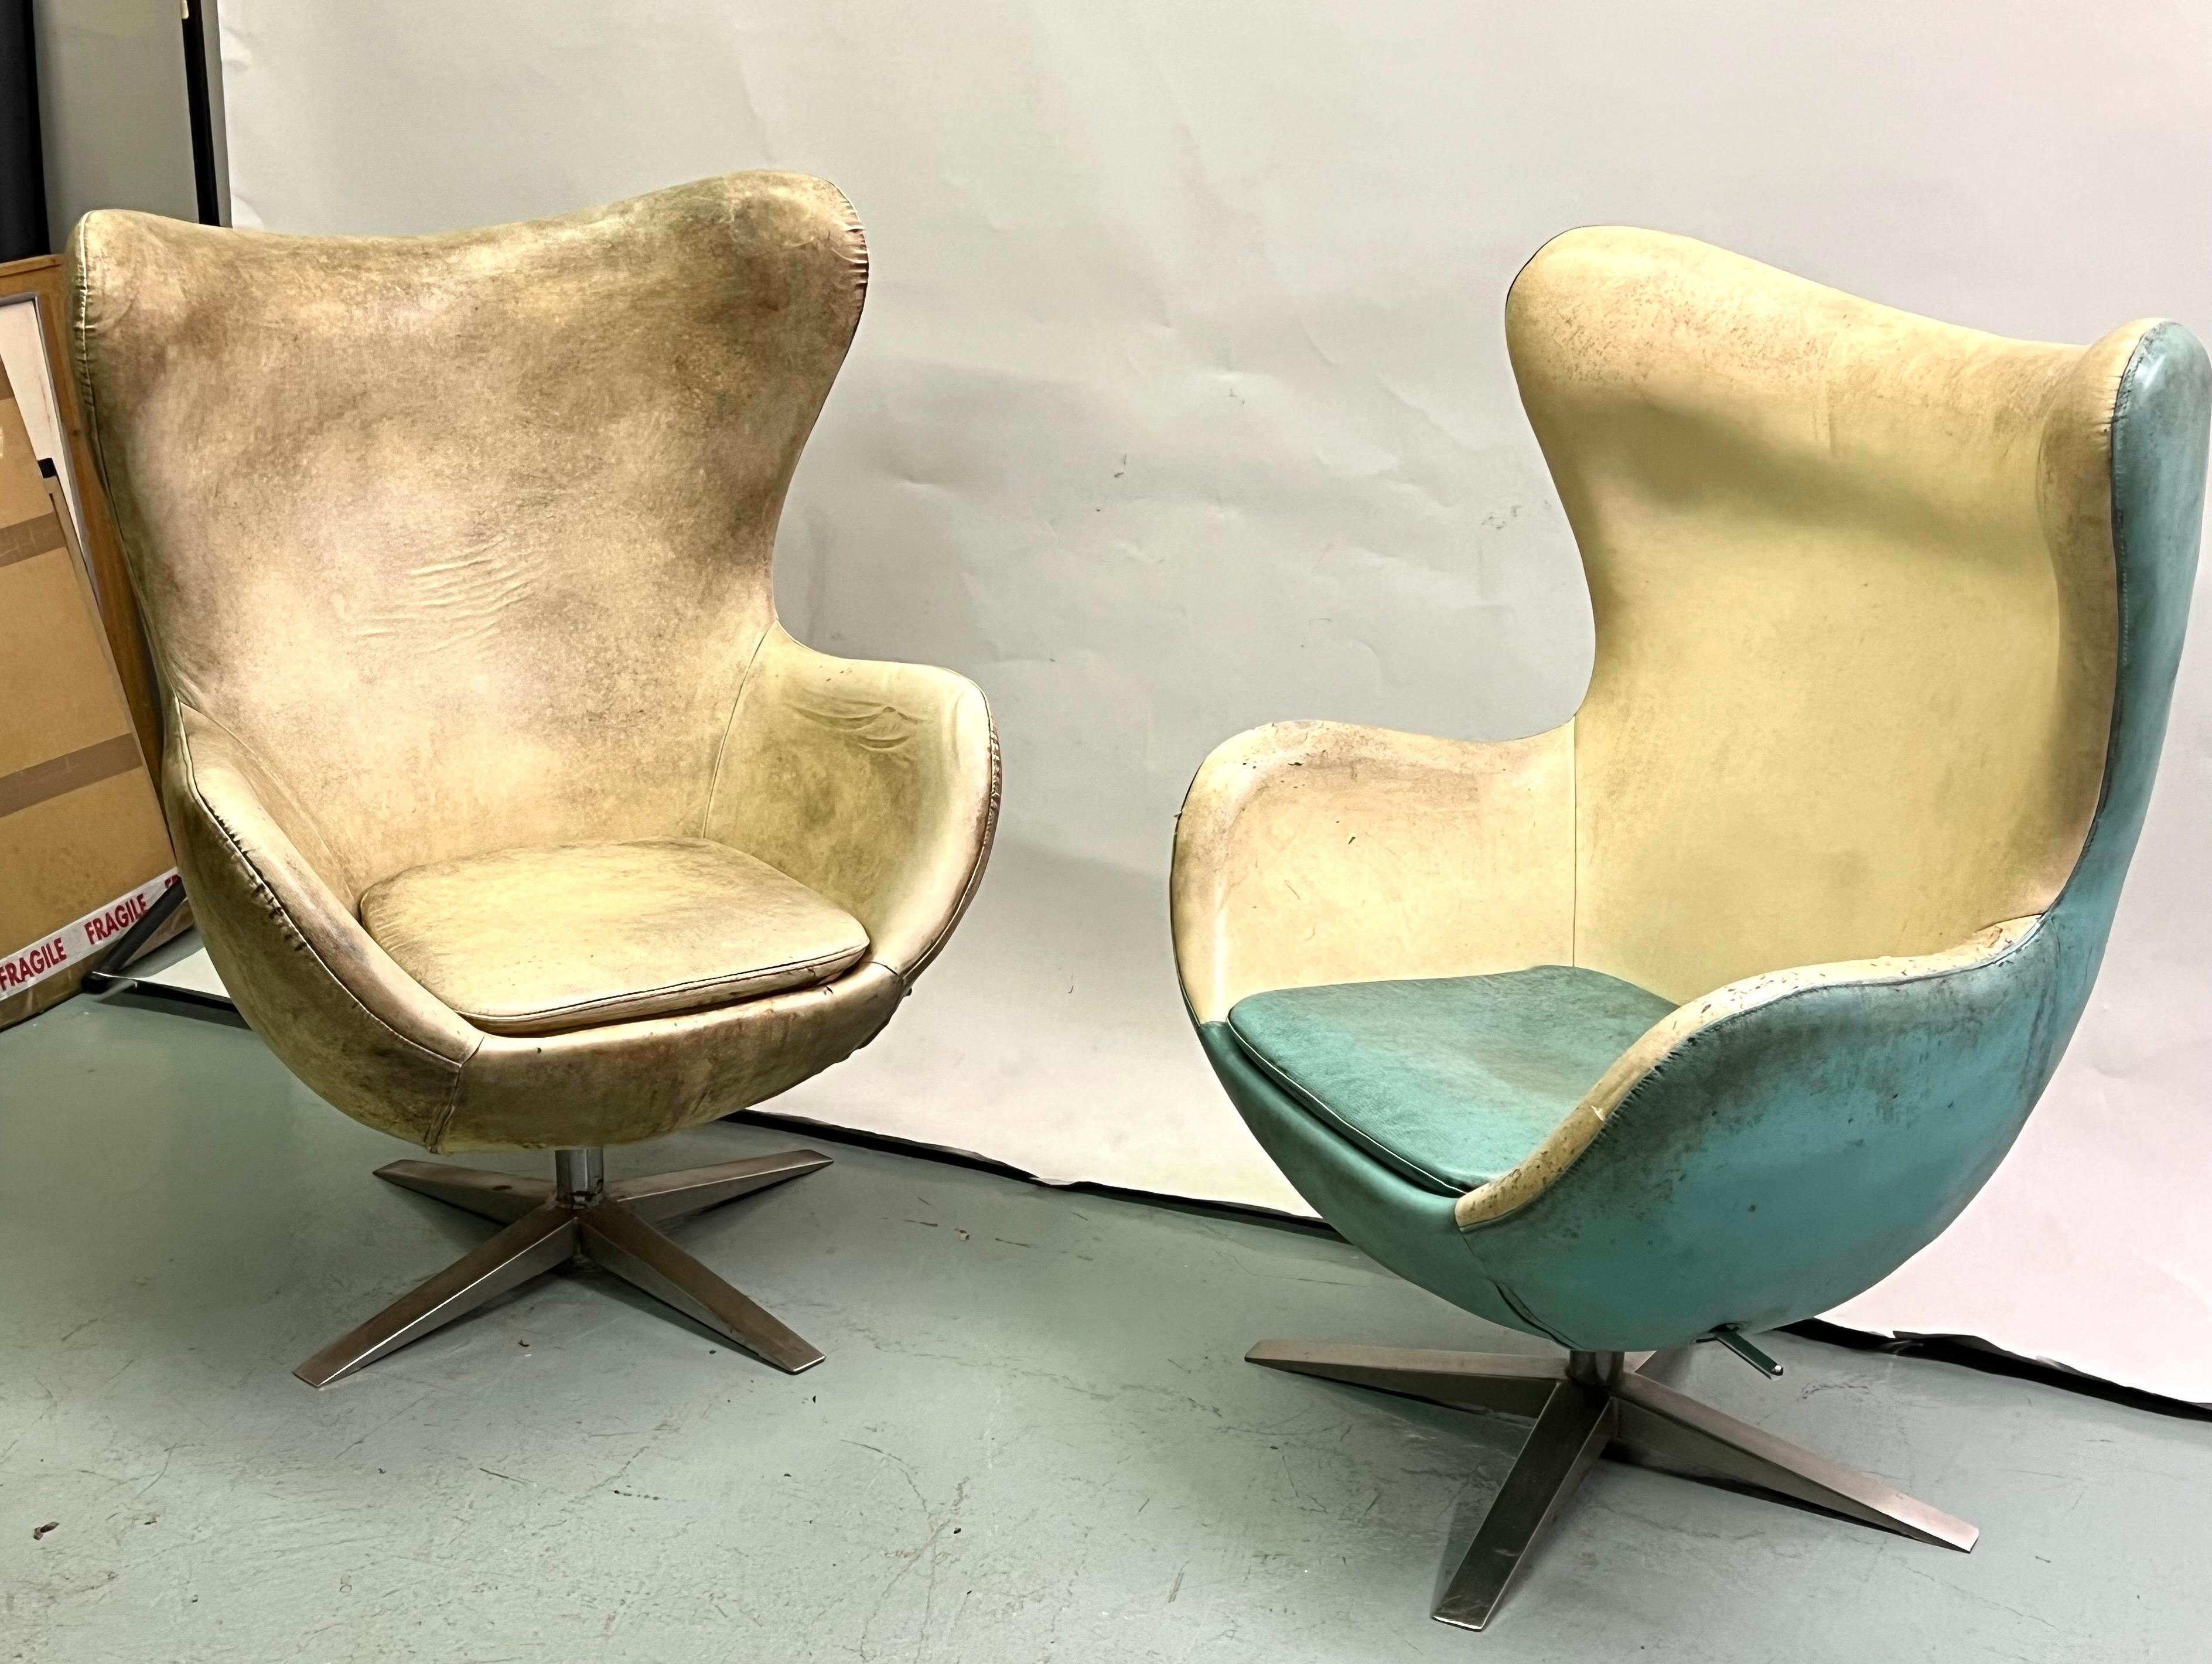 Hand-Crafted Early Model, Pair of Vintage Leather Danish Egg Chair, Arne Jacobsen, c. 1960 For Sale